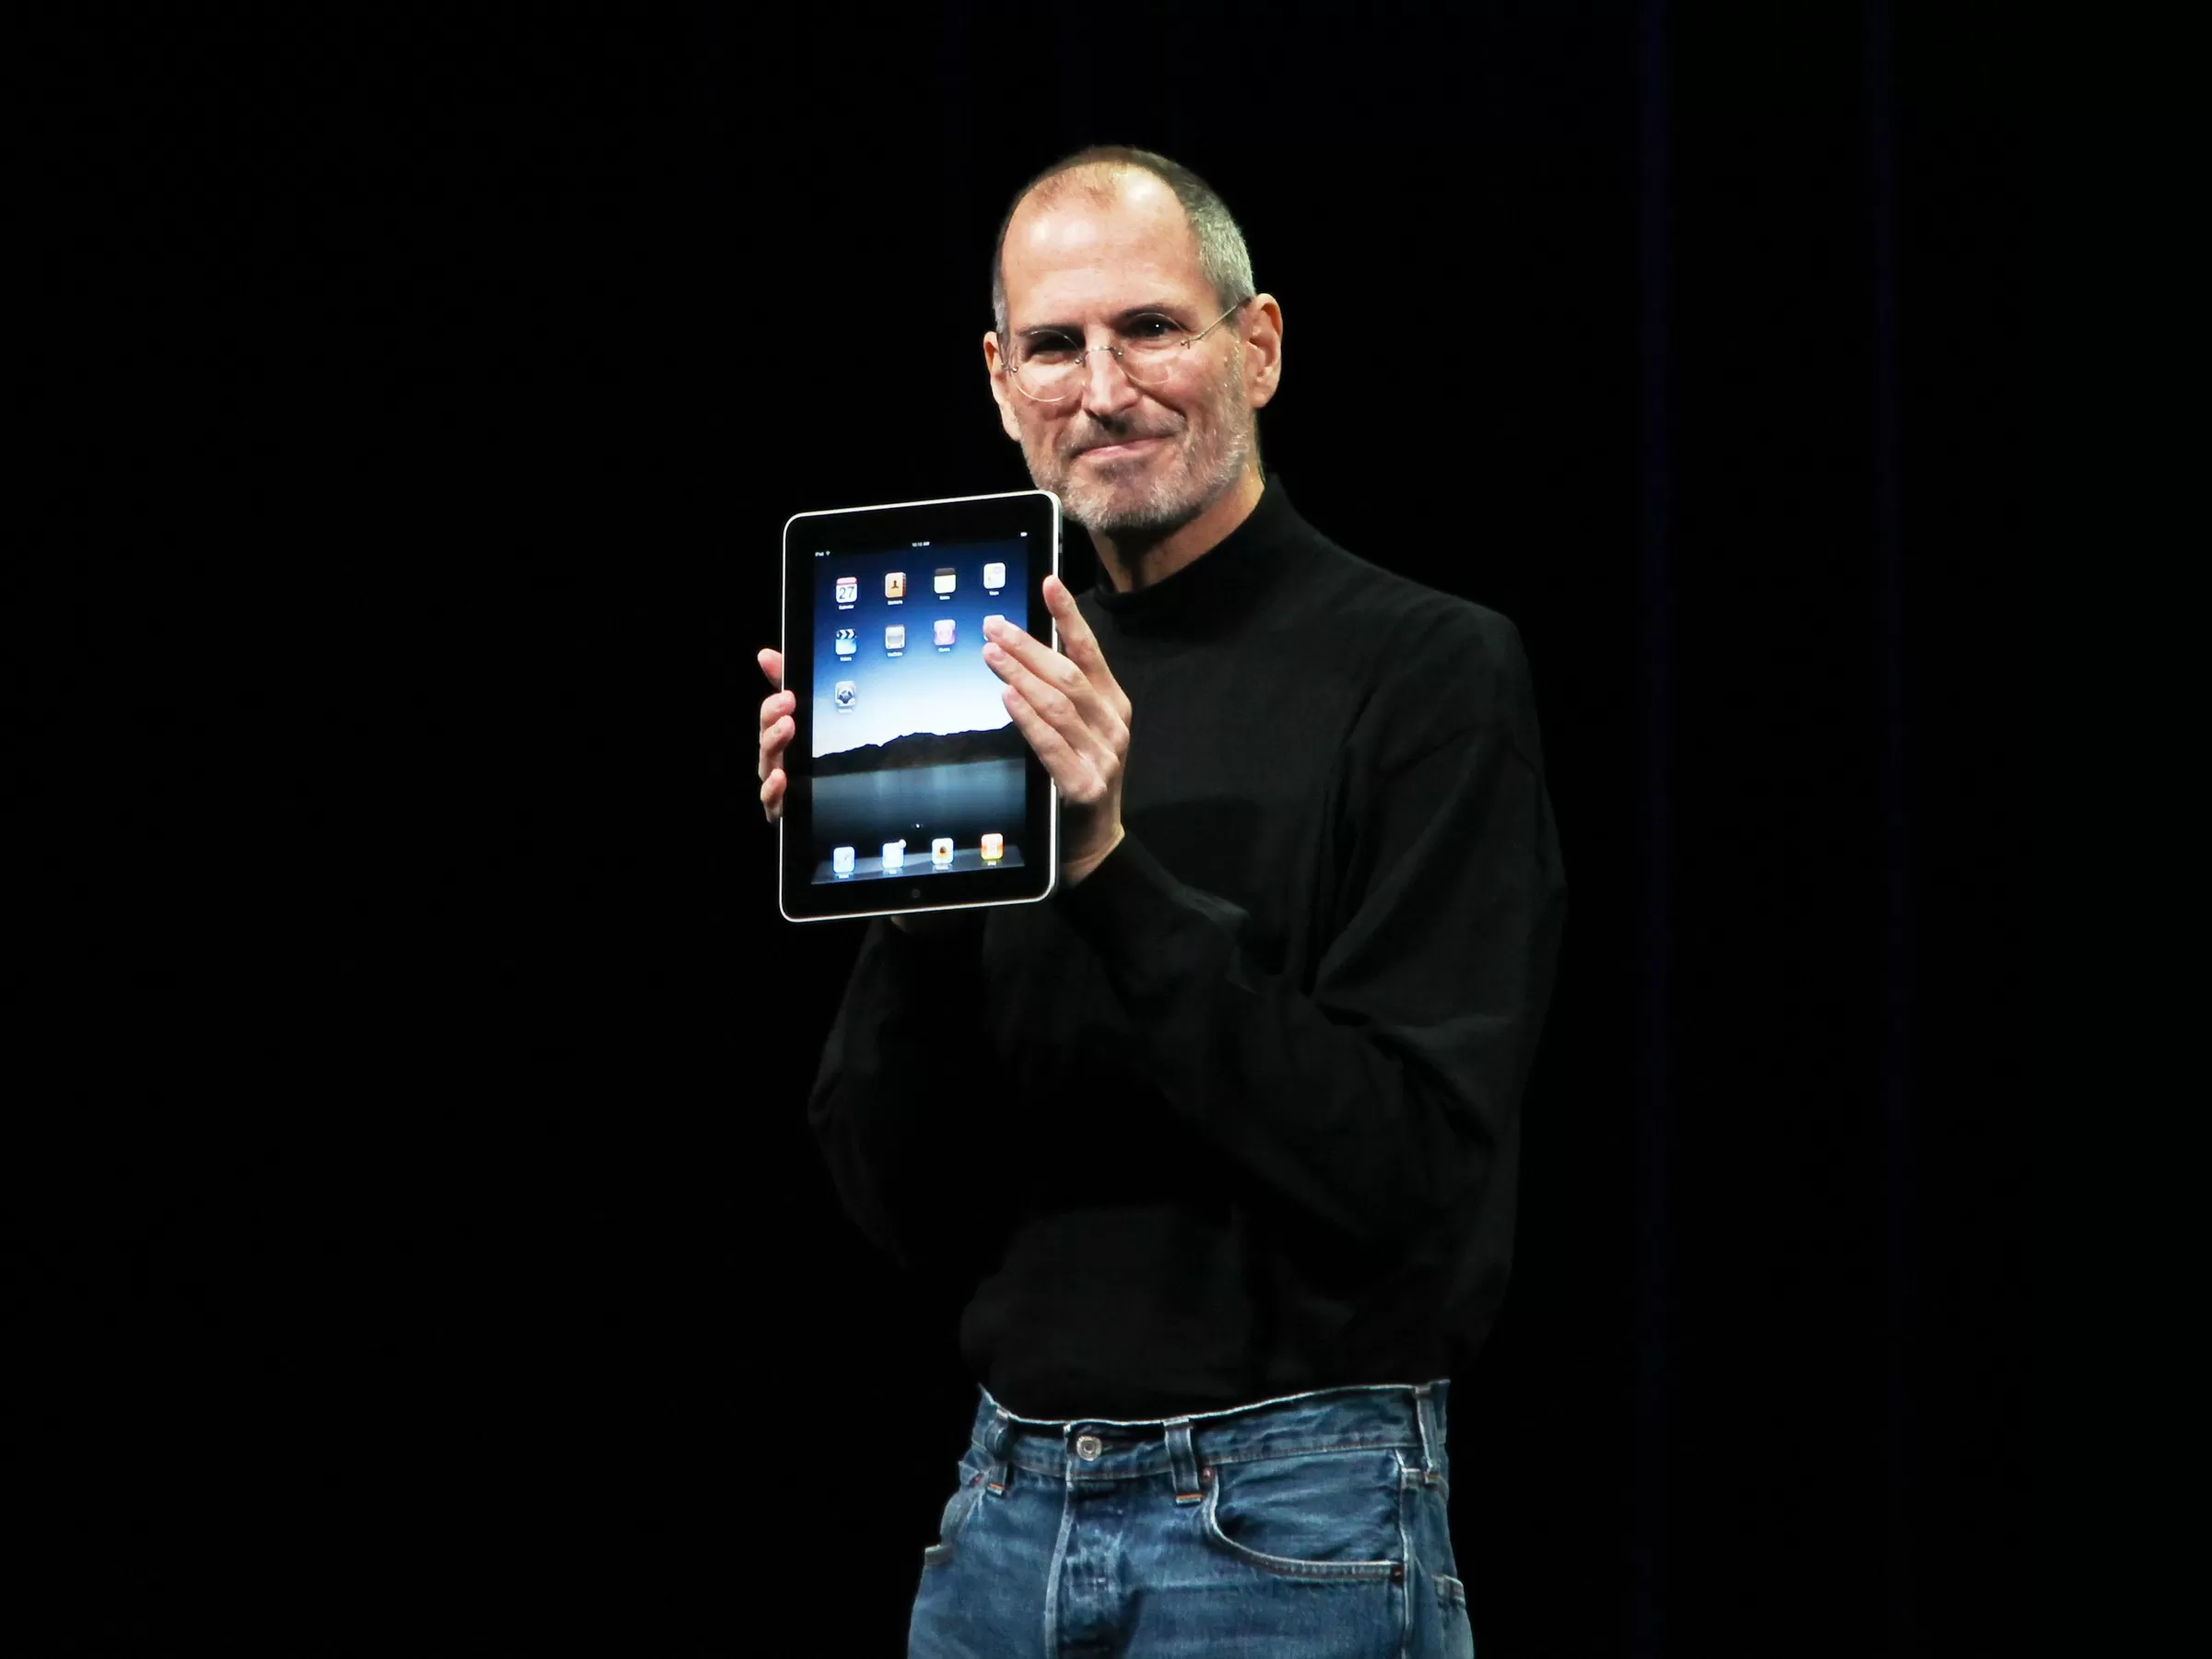 Steve Jobs' 1973 application sold for $300,000 more in physical form than its NFT version